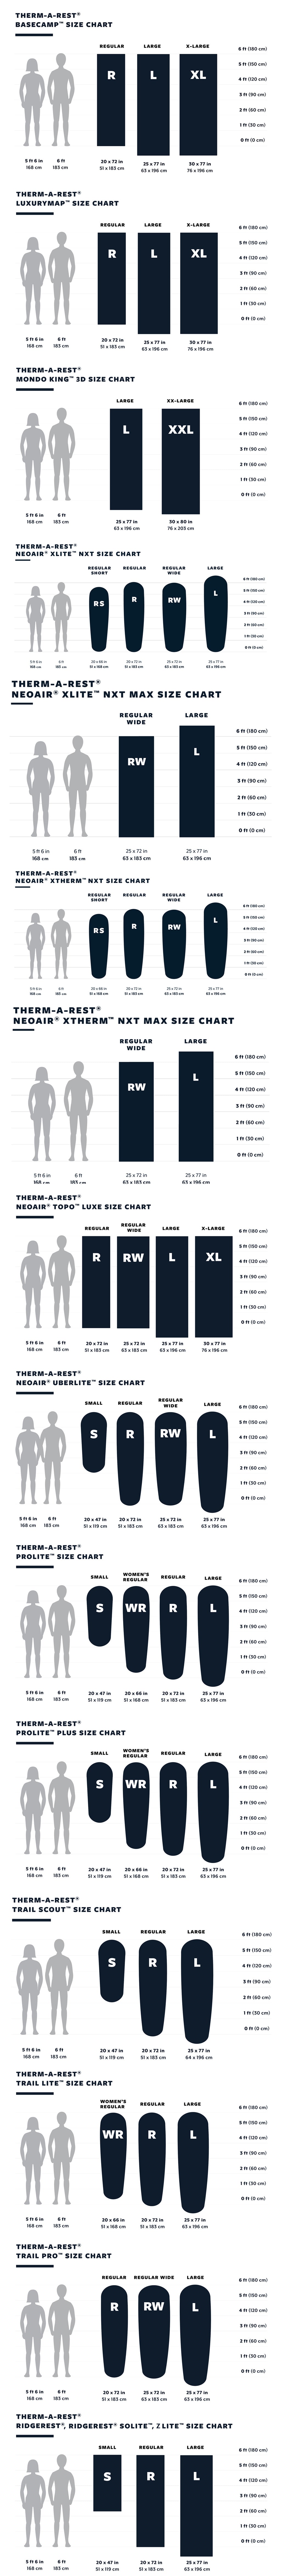 Therm-a-Rest Sleeping Pad Size Chart